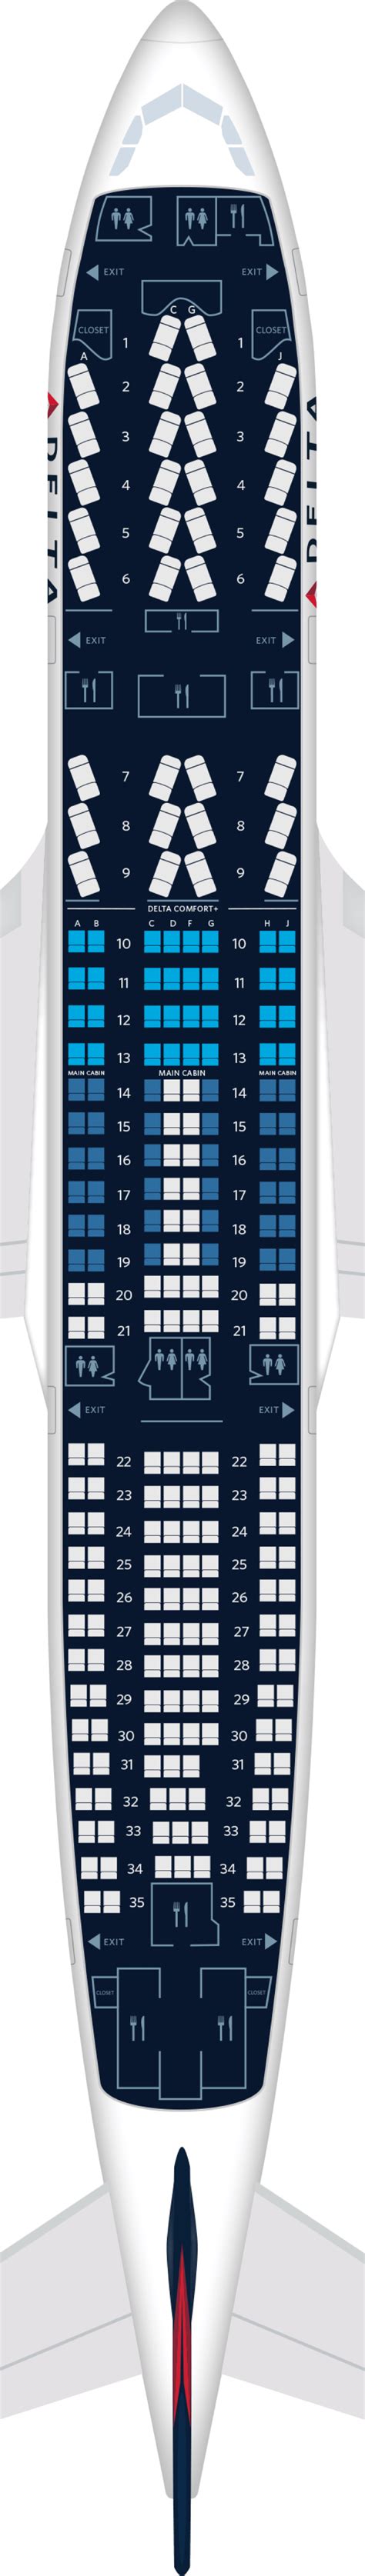 17 Airbus A330 300 Delta Seat Map Background Airbus Way